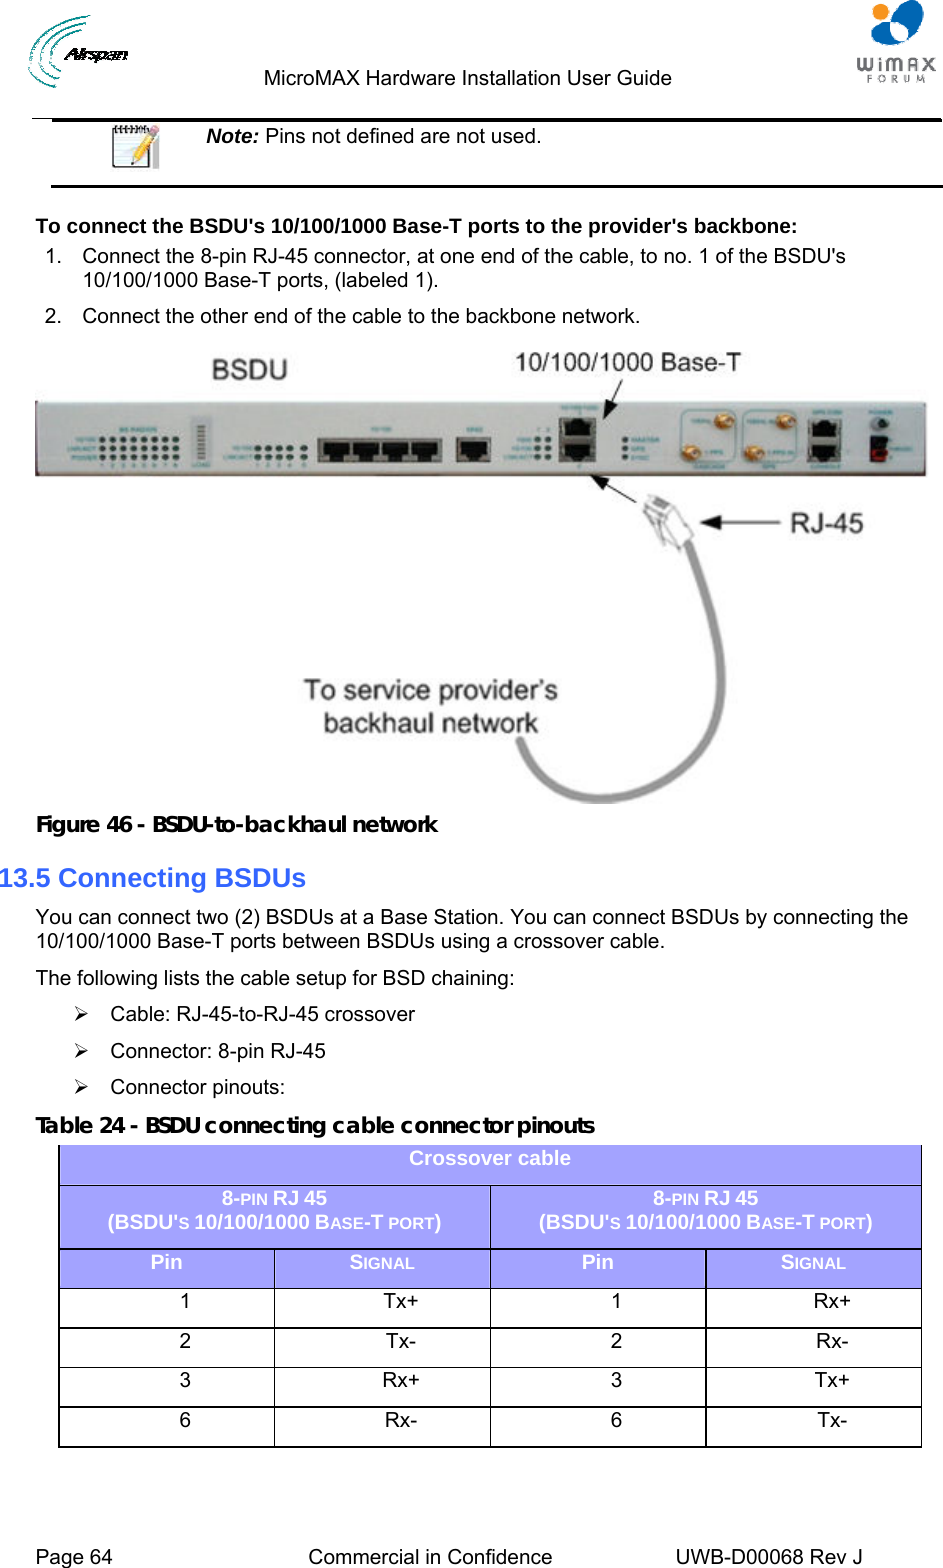                                  MicroMAX Hardware Installation User Guide     Page 64  Commercial in Confidence  UWB-D00068 Rev J    Note: Pins not defined are not used.  To connect the BSDU&apos;s 10/100/1000 Base-T ports to the provider&apos;s backbone: 1.  Connect the 8-pin RJ-45 connector, at one end of the cable, to no. 1 of the BSDU&apos;s 10/100/1000 Base-T ports, (labeled 1). 2.  Connect the other end of the cable to the backbone network.  Figure 46 - BSDU-to-backhaul network 13.5 Connecting BSDUs You can connect two (2) BSDUs at a Base Station. You can connect BSDUs by connecting the 10/100/1000 Base-T ports between BSDUs using a crossover cable. The following lists the cable setup for BSD chaining: ¾ Cable: RJ-45-to-RJ-45 crossover ¾  Connector: 8-pin RJ-45 ¾ Connector pinouts: Table 24 - BSDU connecting cable connector pinouts Crossover cable 8-PIN RJ 45 (BSDU&apos;S 10/100/1000 BASE-T PORT)  8-PIN RJ 45 (BSDU&apos;S 10/100/1000 BASE-T PORT) Pin  SIGNAL Pin  SIGNAL 1 Tx+ 1 Rx+ 2 Tx- 2 Rx- 3 Rx+ 3 Tx+ 6 Rx- 6 Tx-  